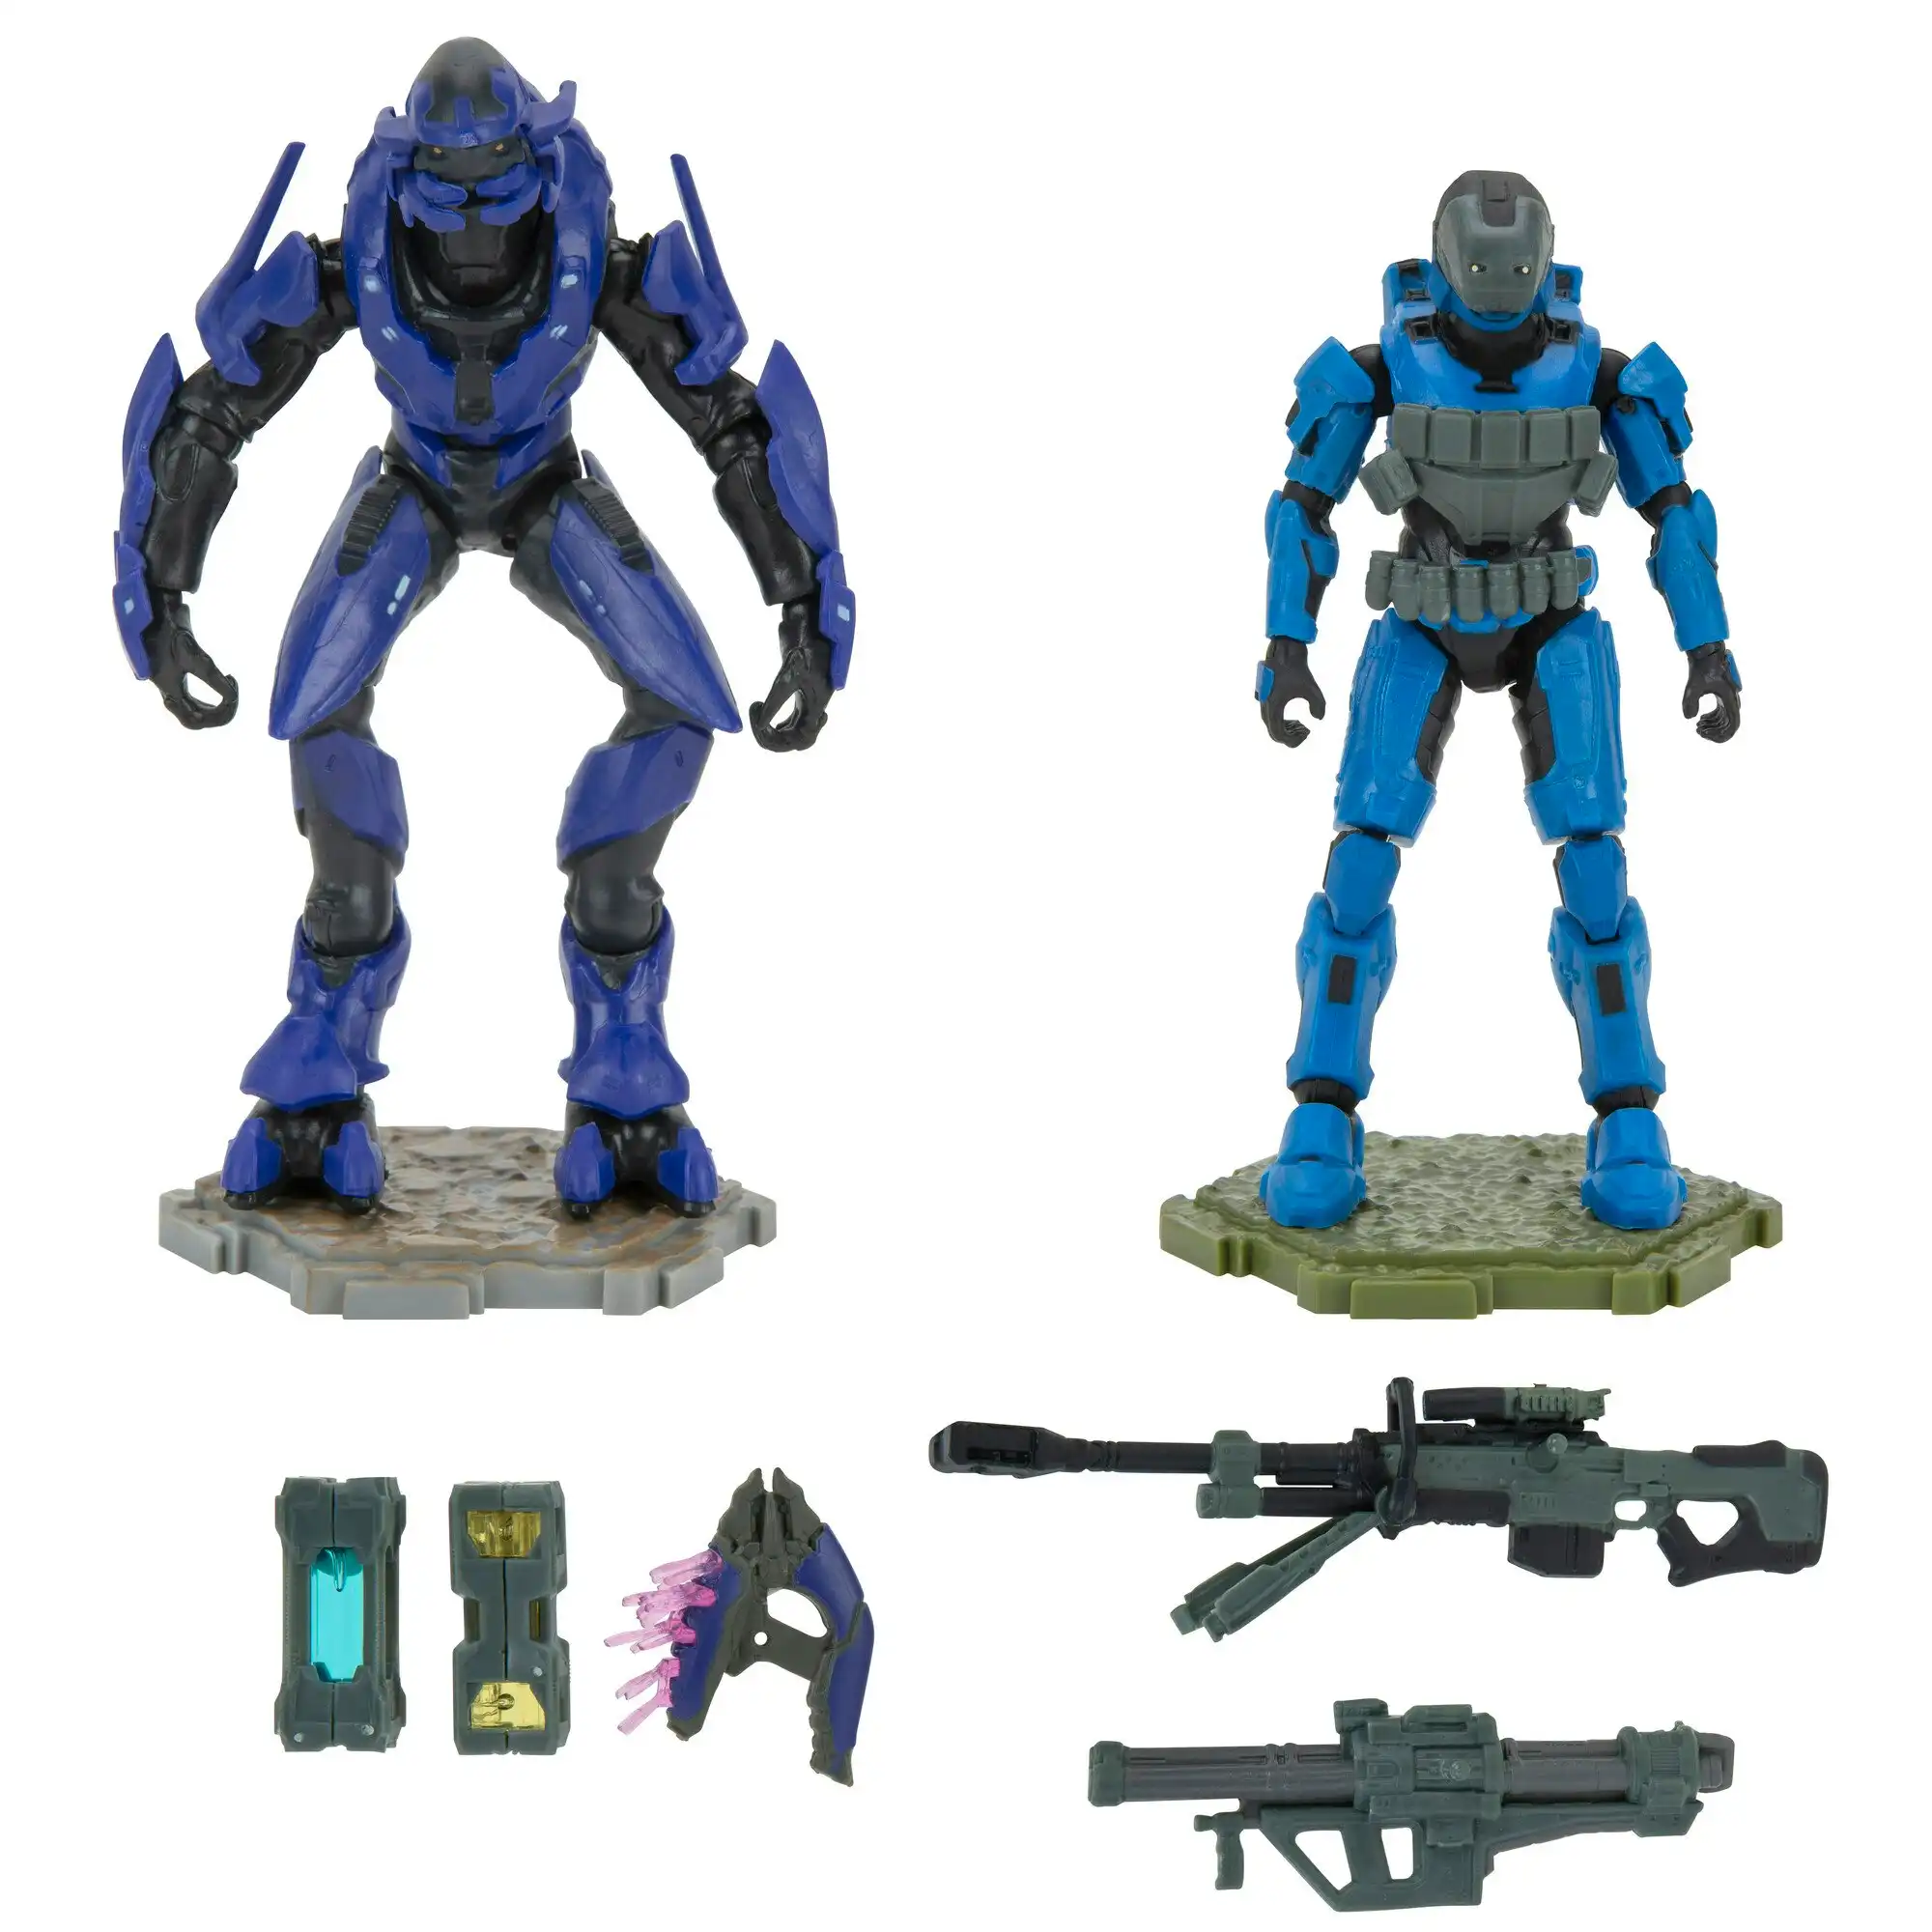 HALO Mission Pack 4 " Figures And Accessories